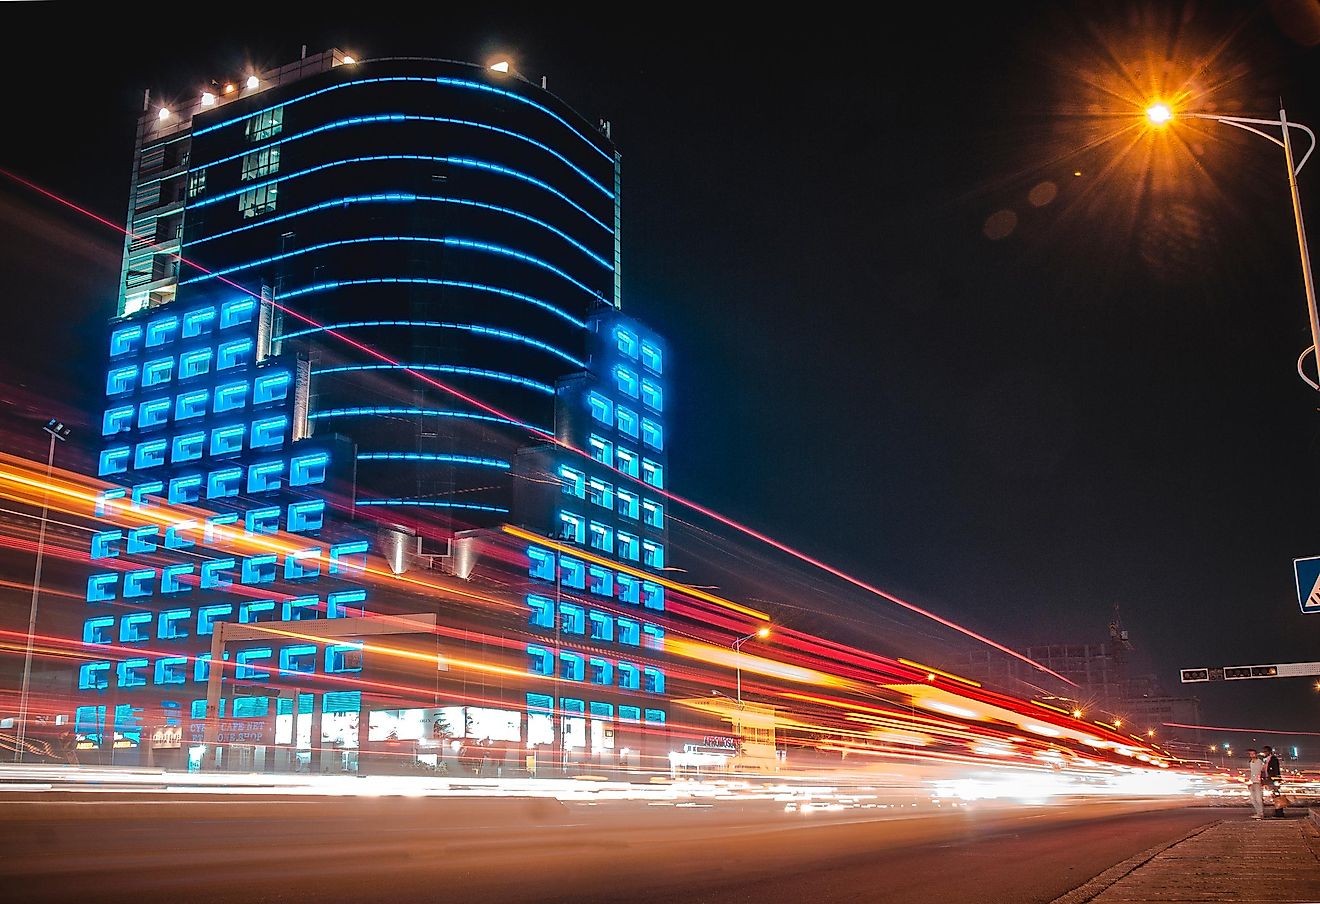 Light Streaks in front of The Future Tower on the 30 june Boulevard in Kinshasa, Congo.